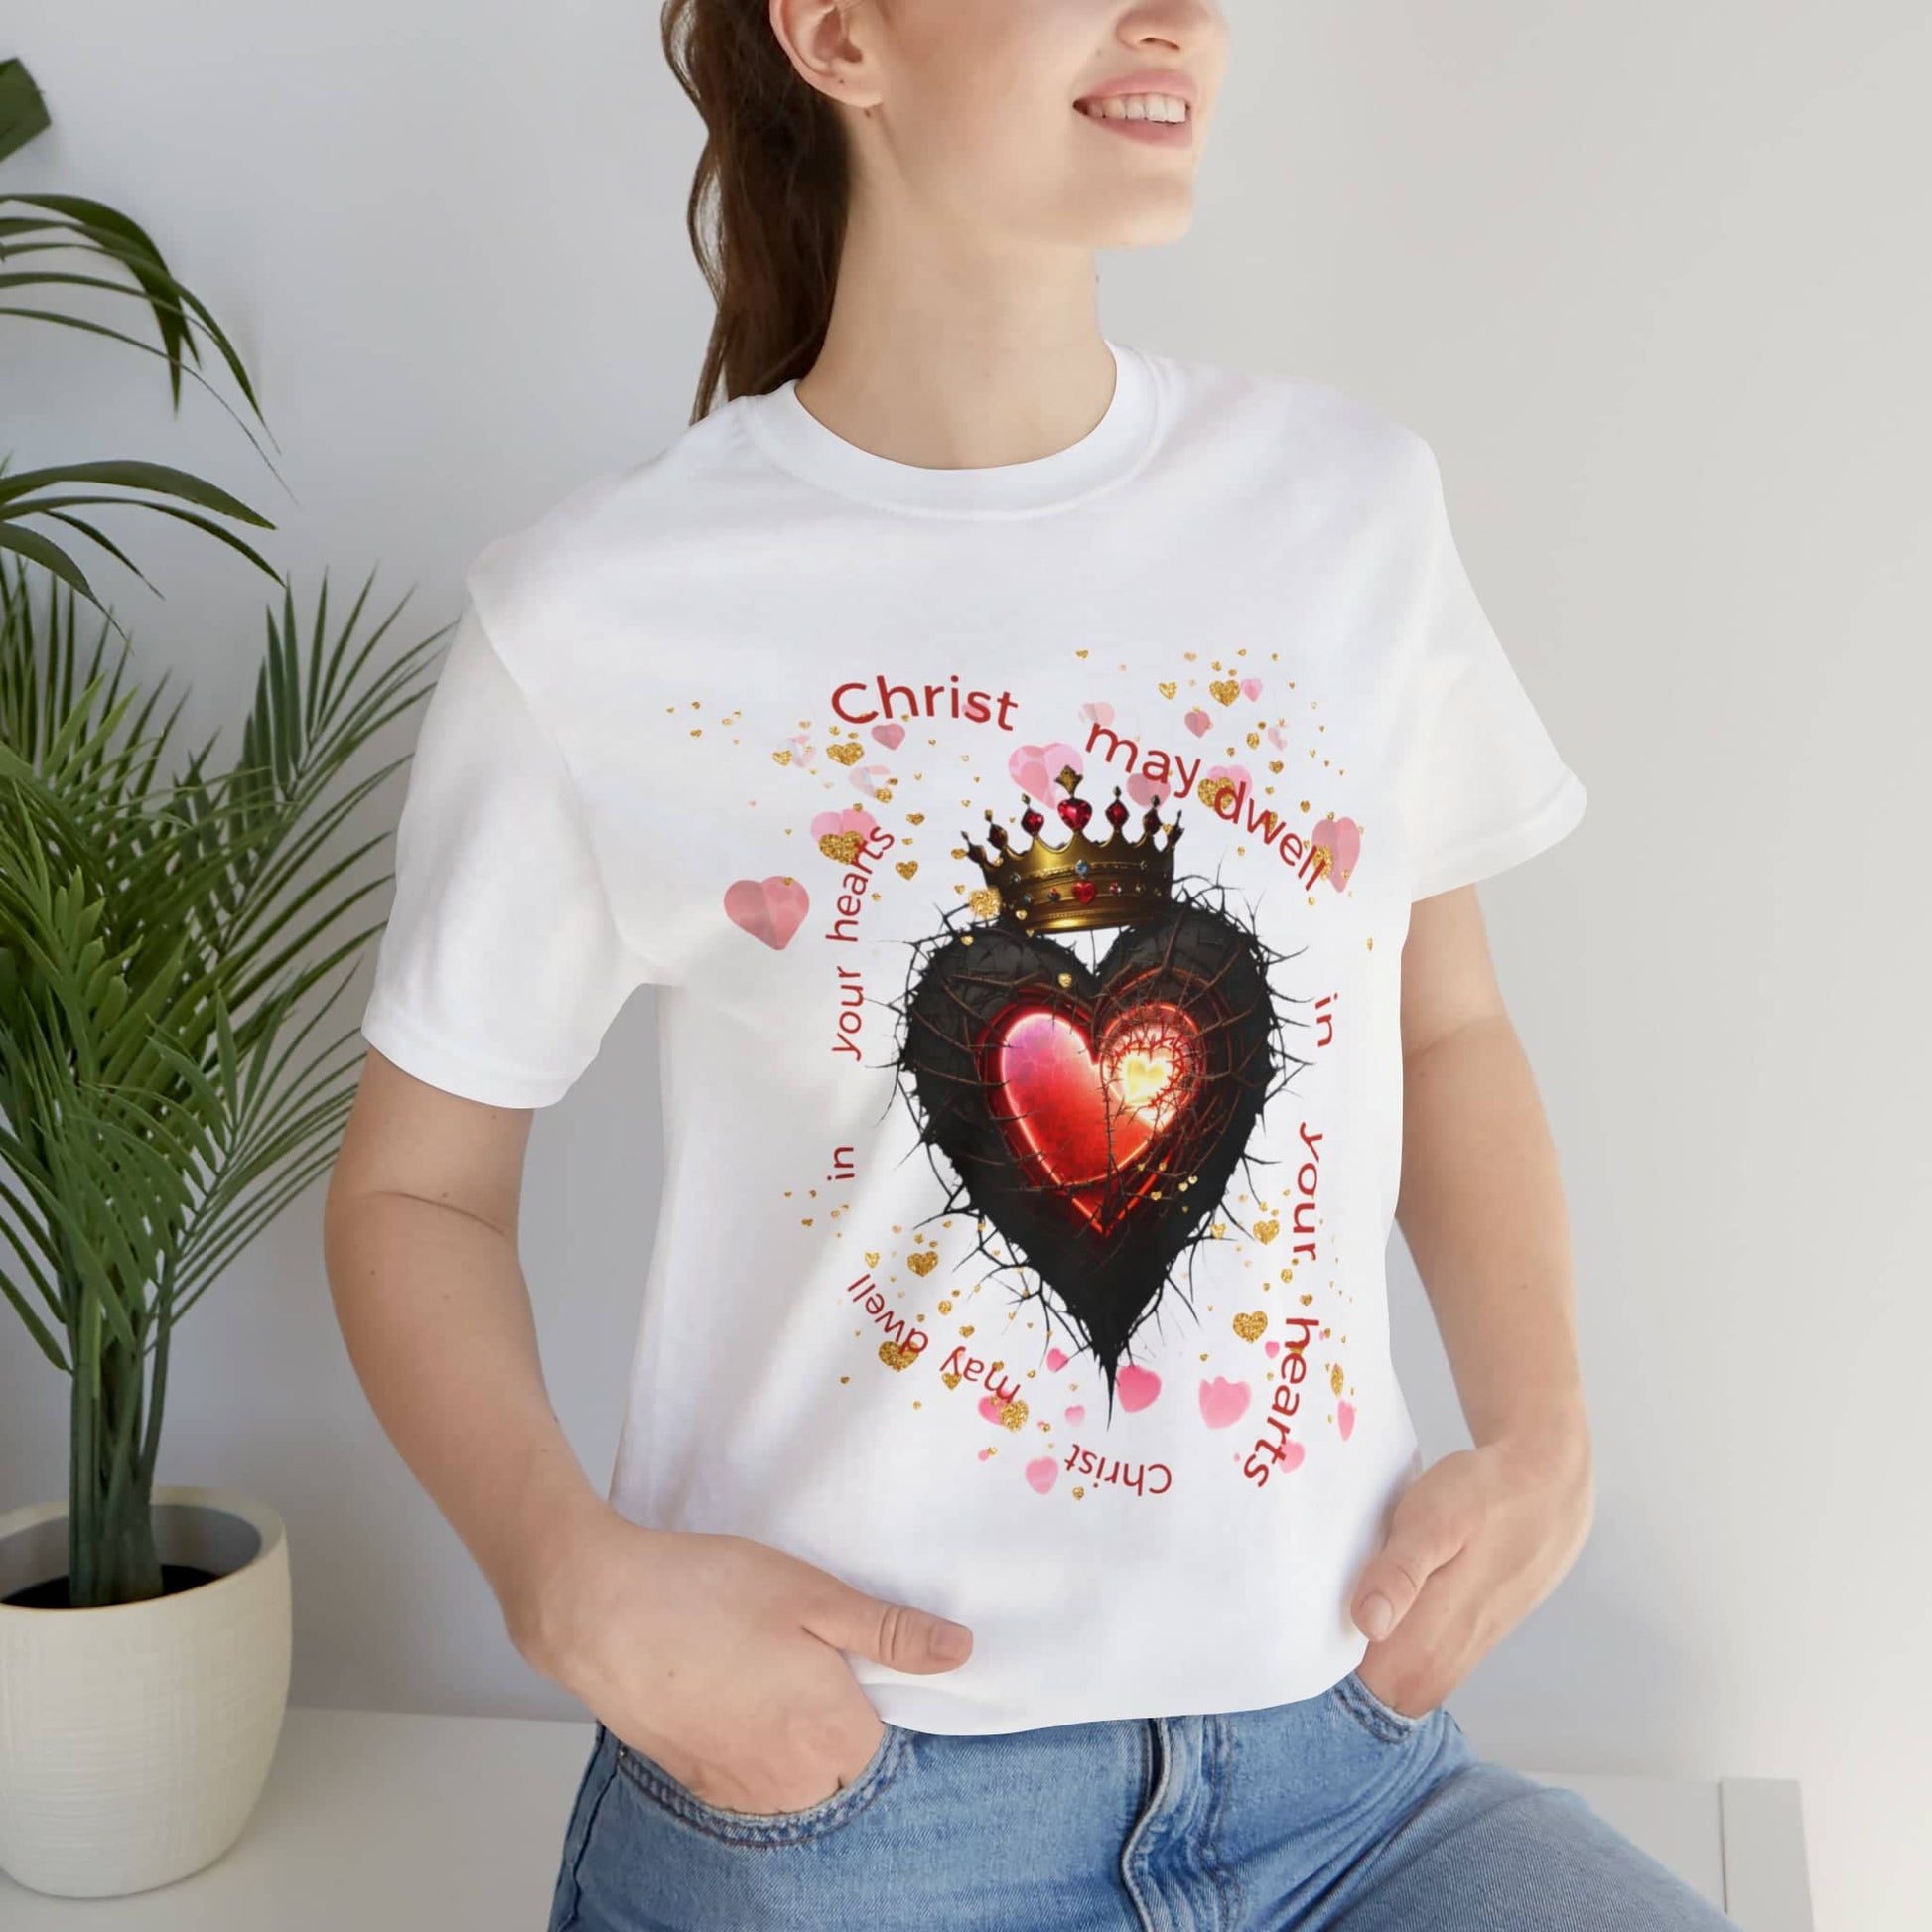 Christ May Dwell in Your Hearts' Unisex Tee! T-Shirt Bigger Than Life White S 